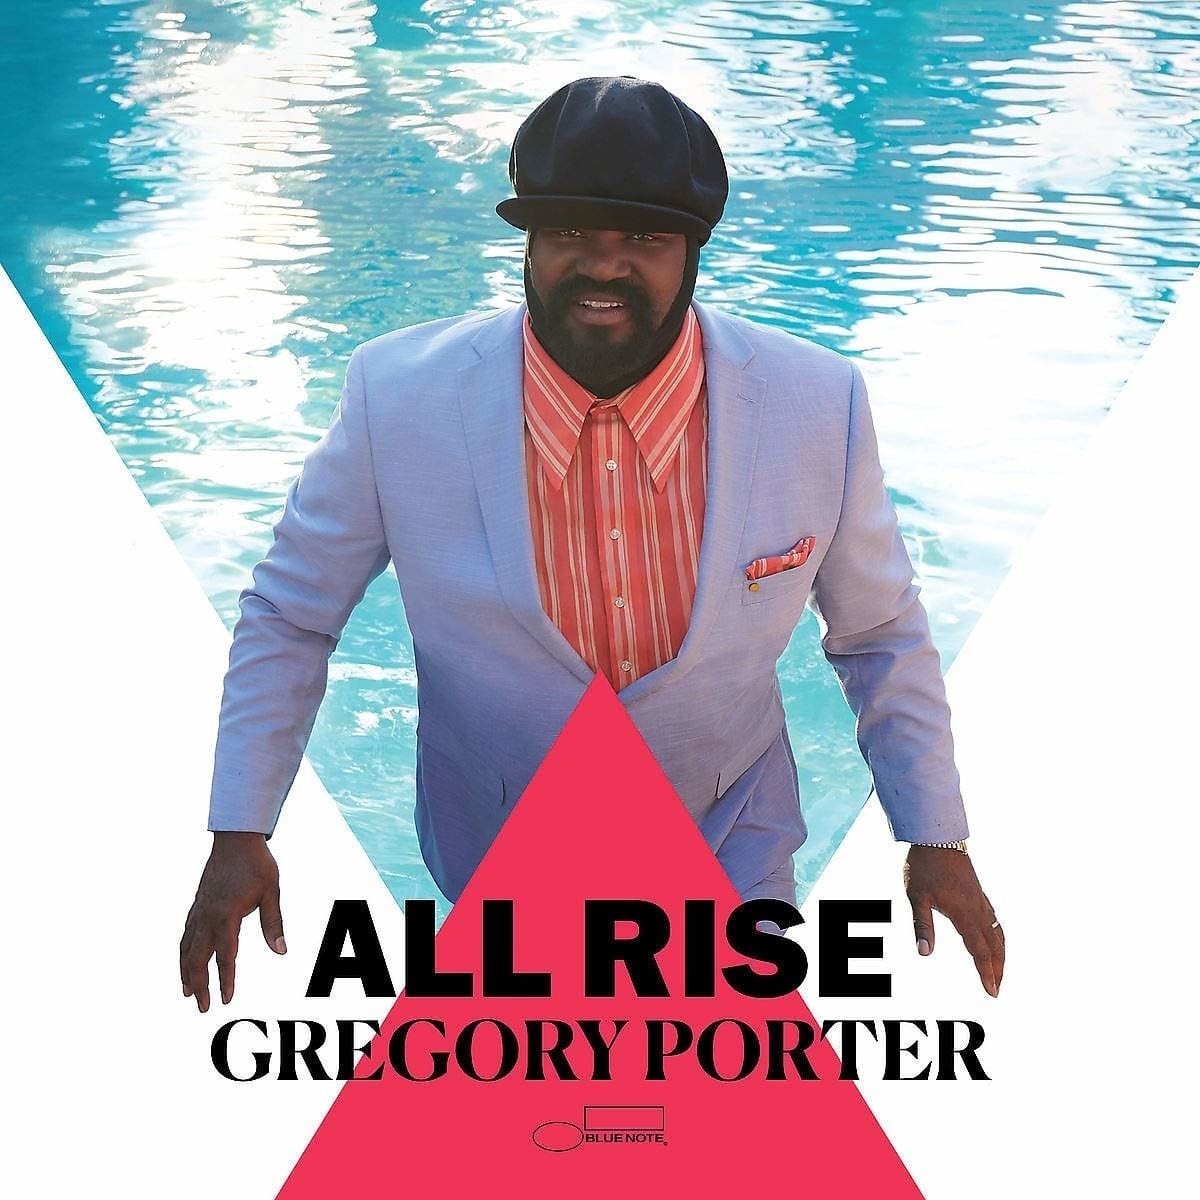 Gregory Porter Creates Another Collection of Soul-Jazz Gems on ‘All Rise’